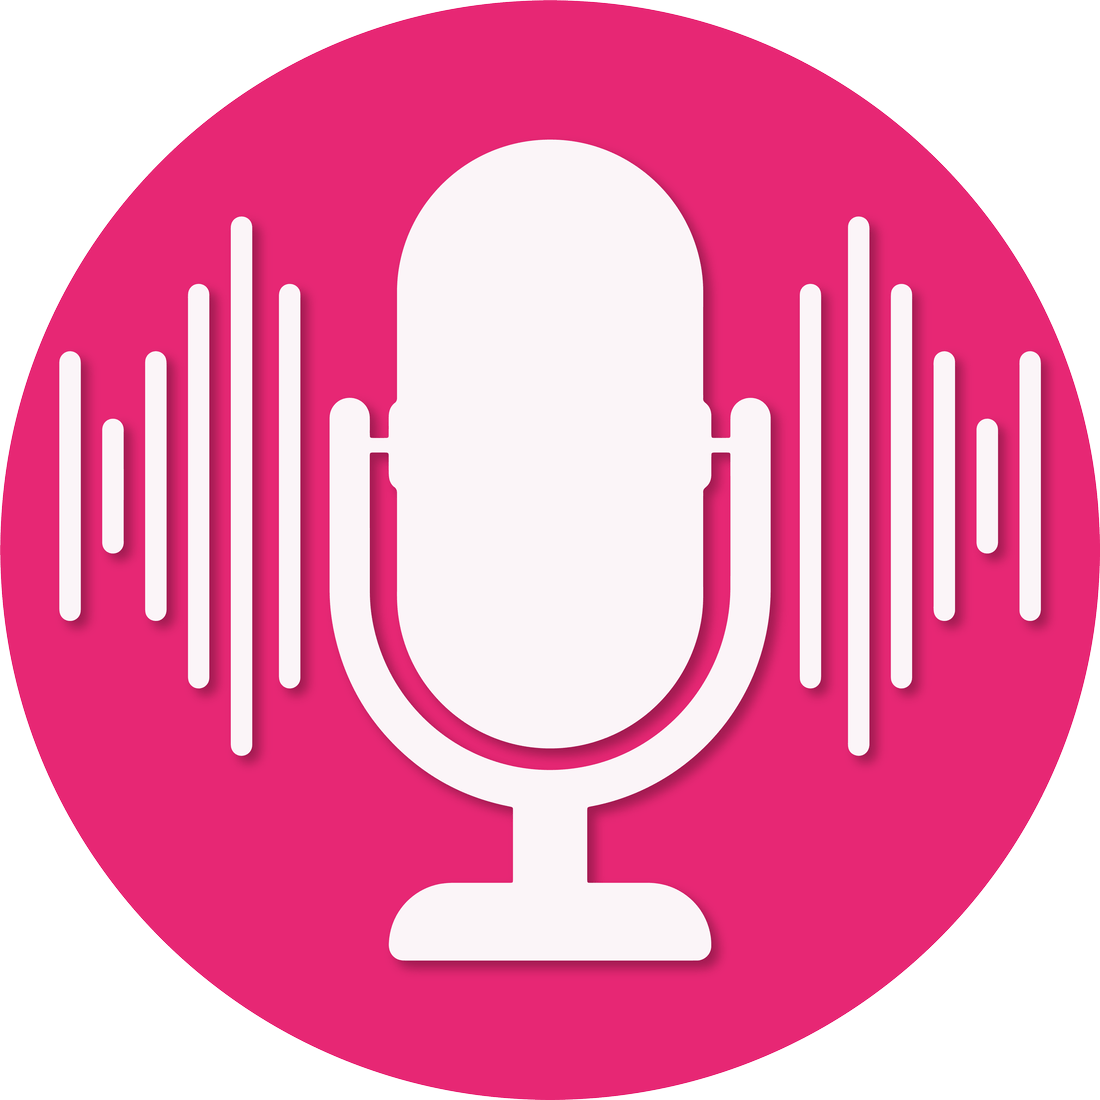 Microphone icon representing our story in a podcast